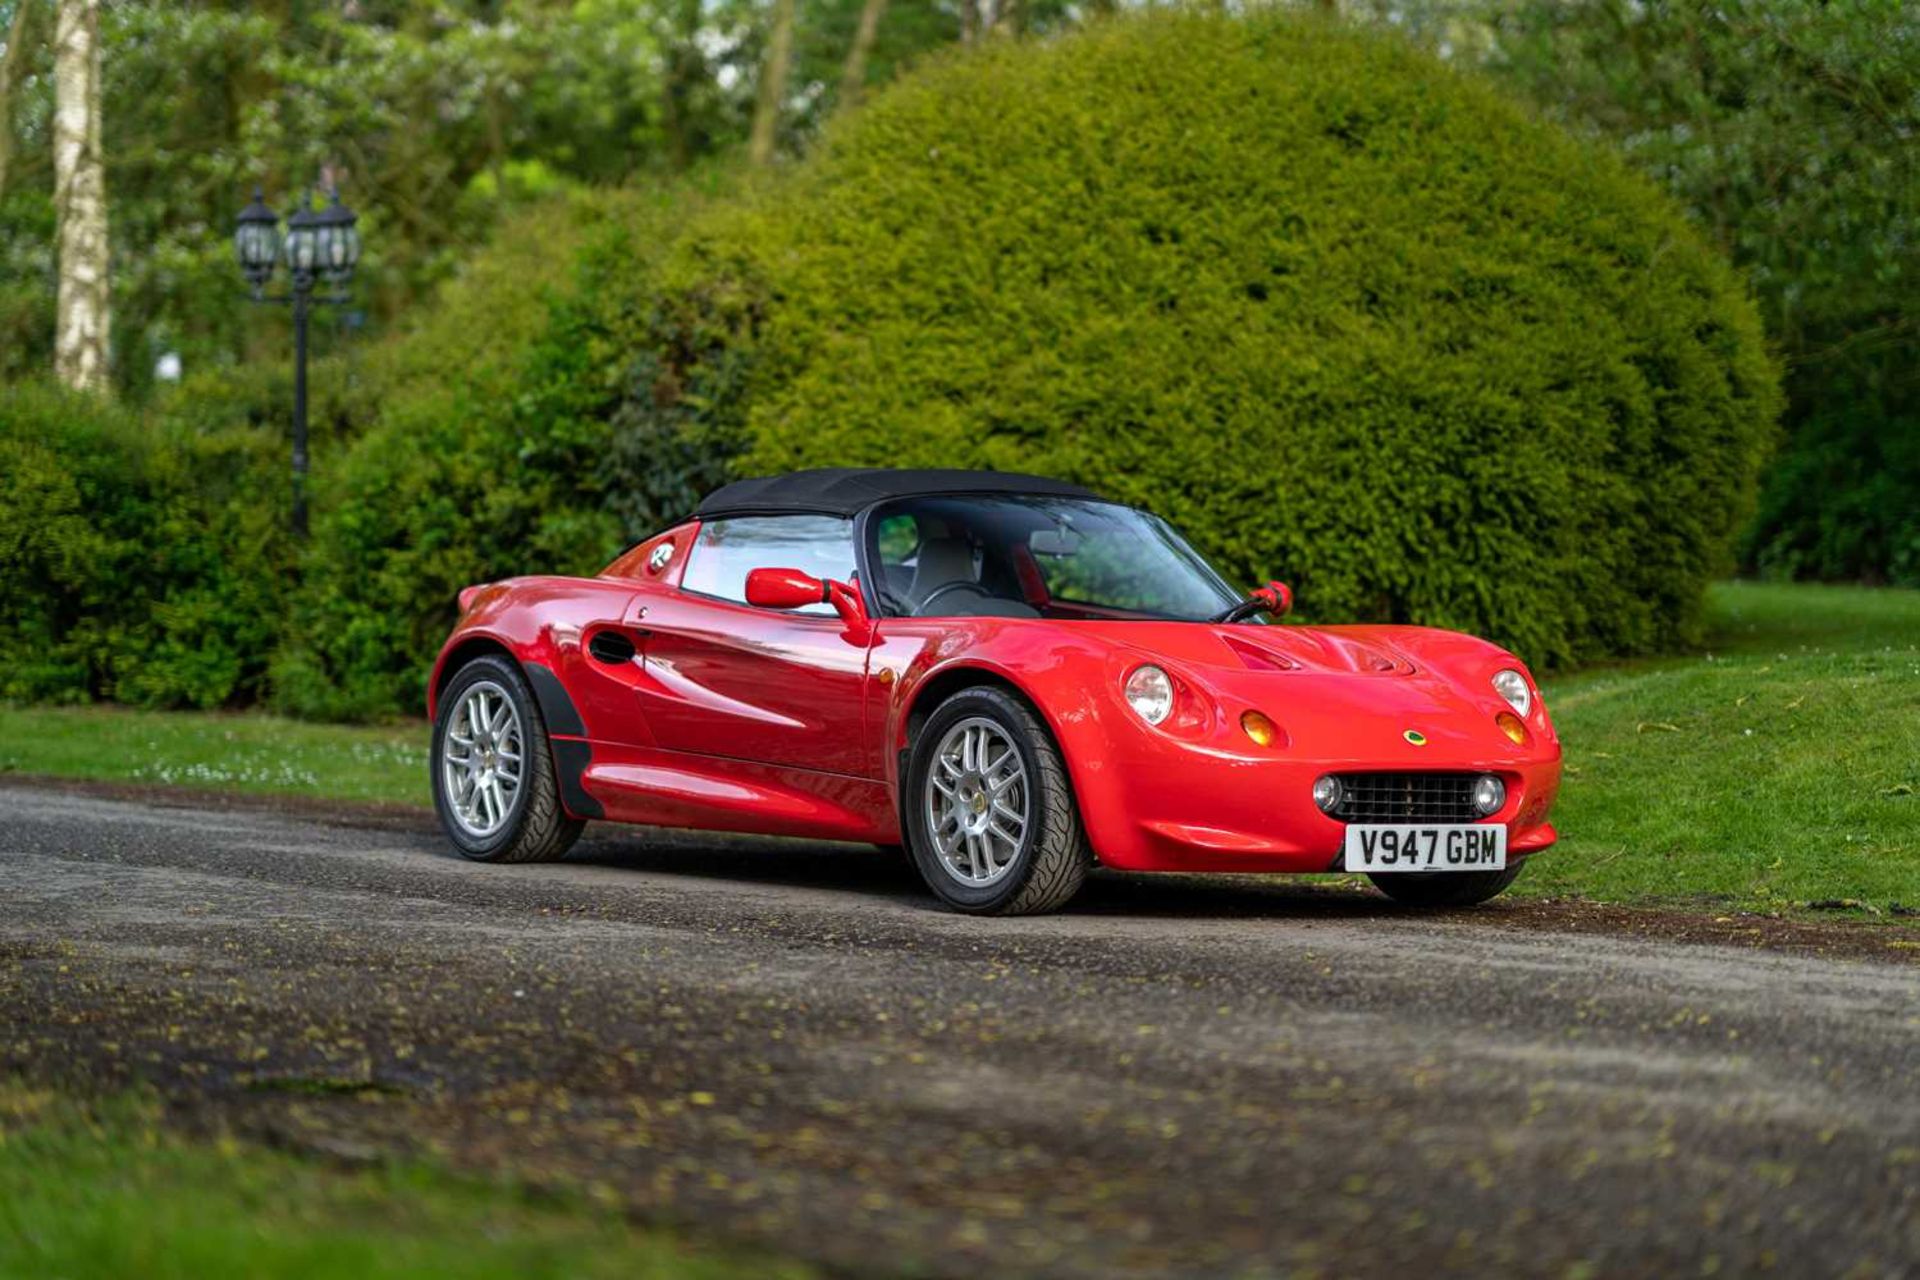 1999 Lotus Elise S1 Only 39,000 miles from new - Image 6 of 57